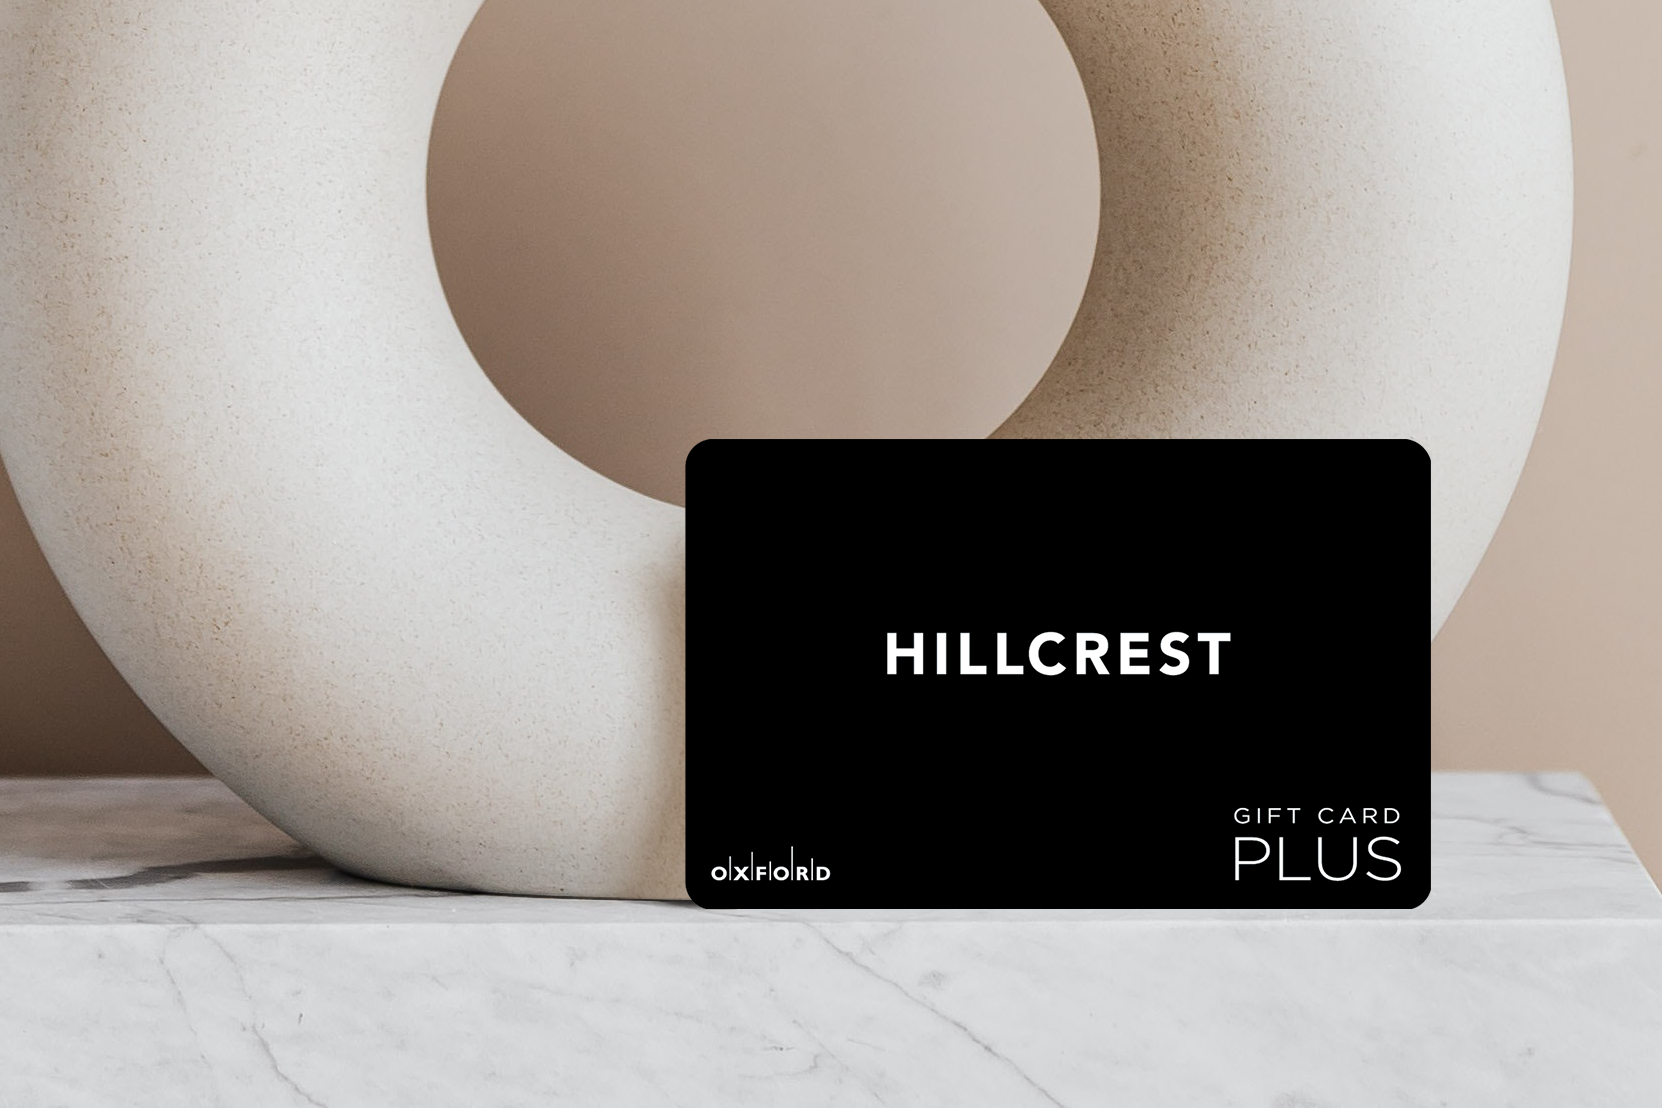 promotional image of a black Hillcrest gift card in front of a neutral circular vase